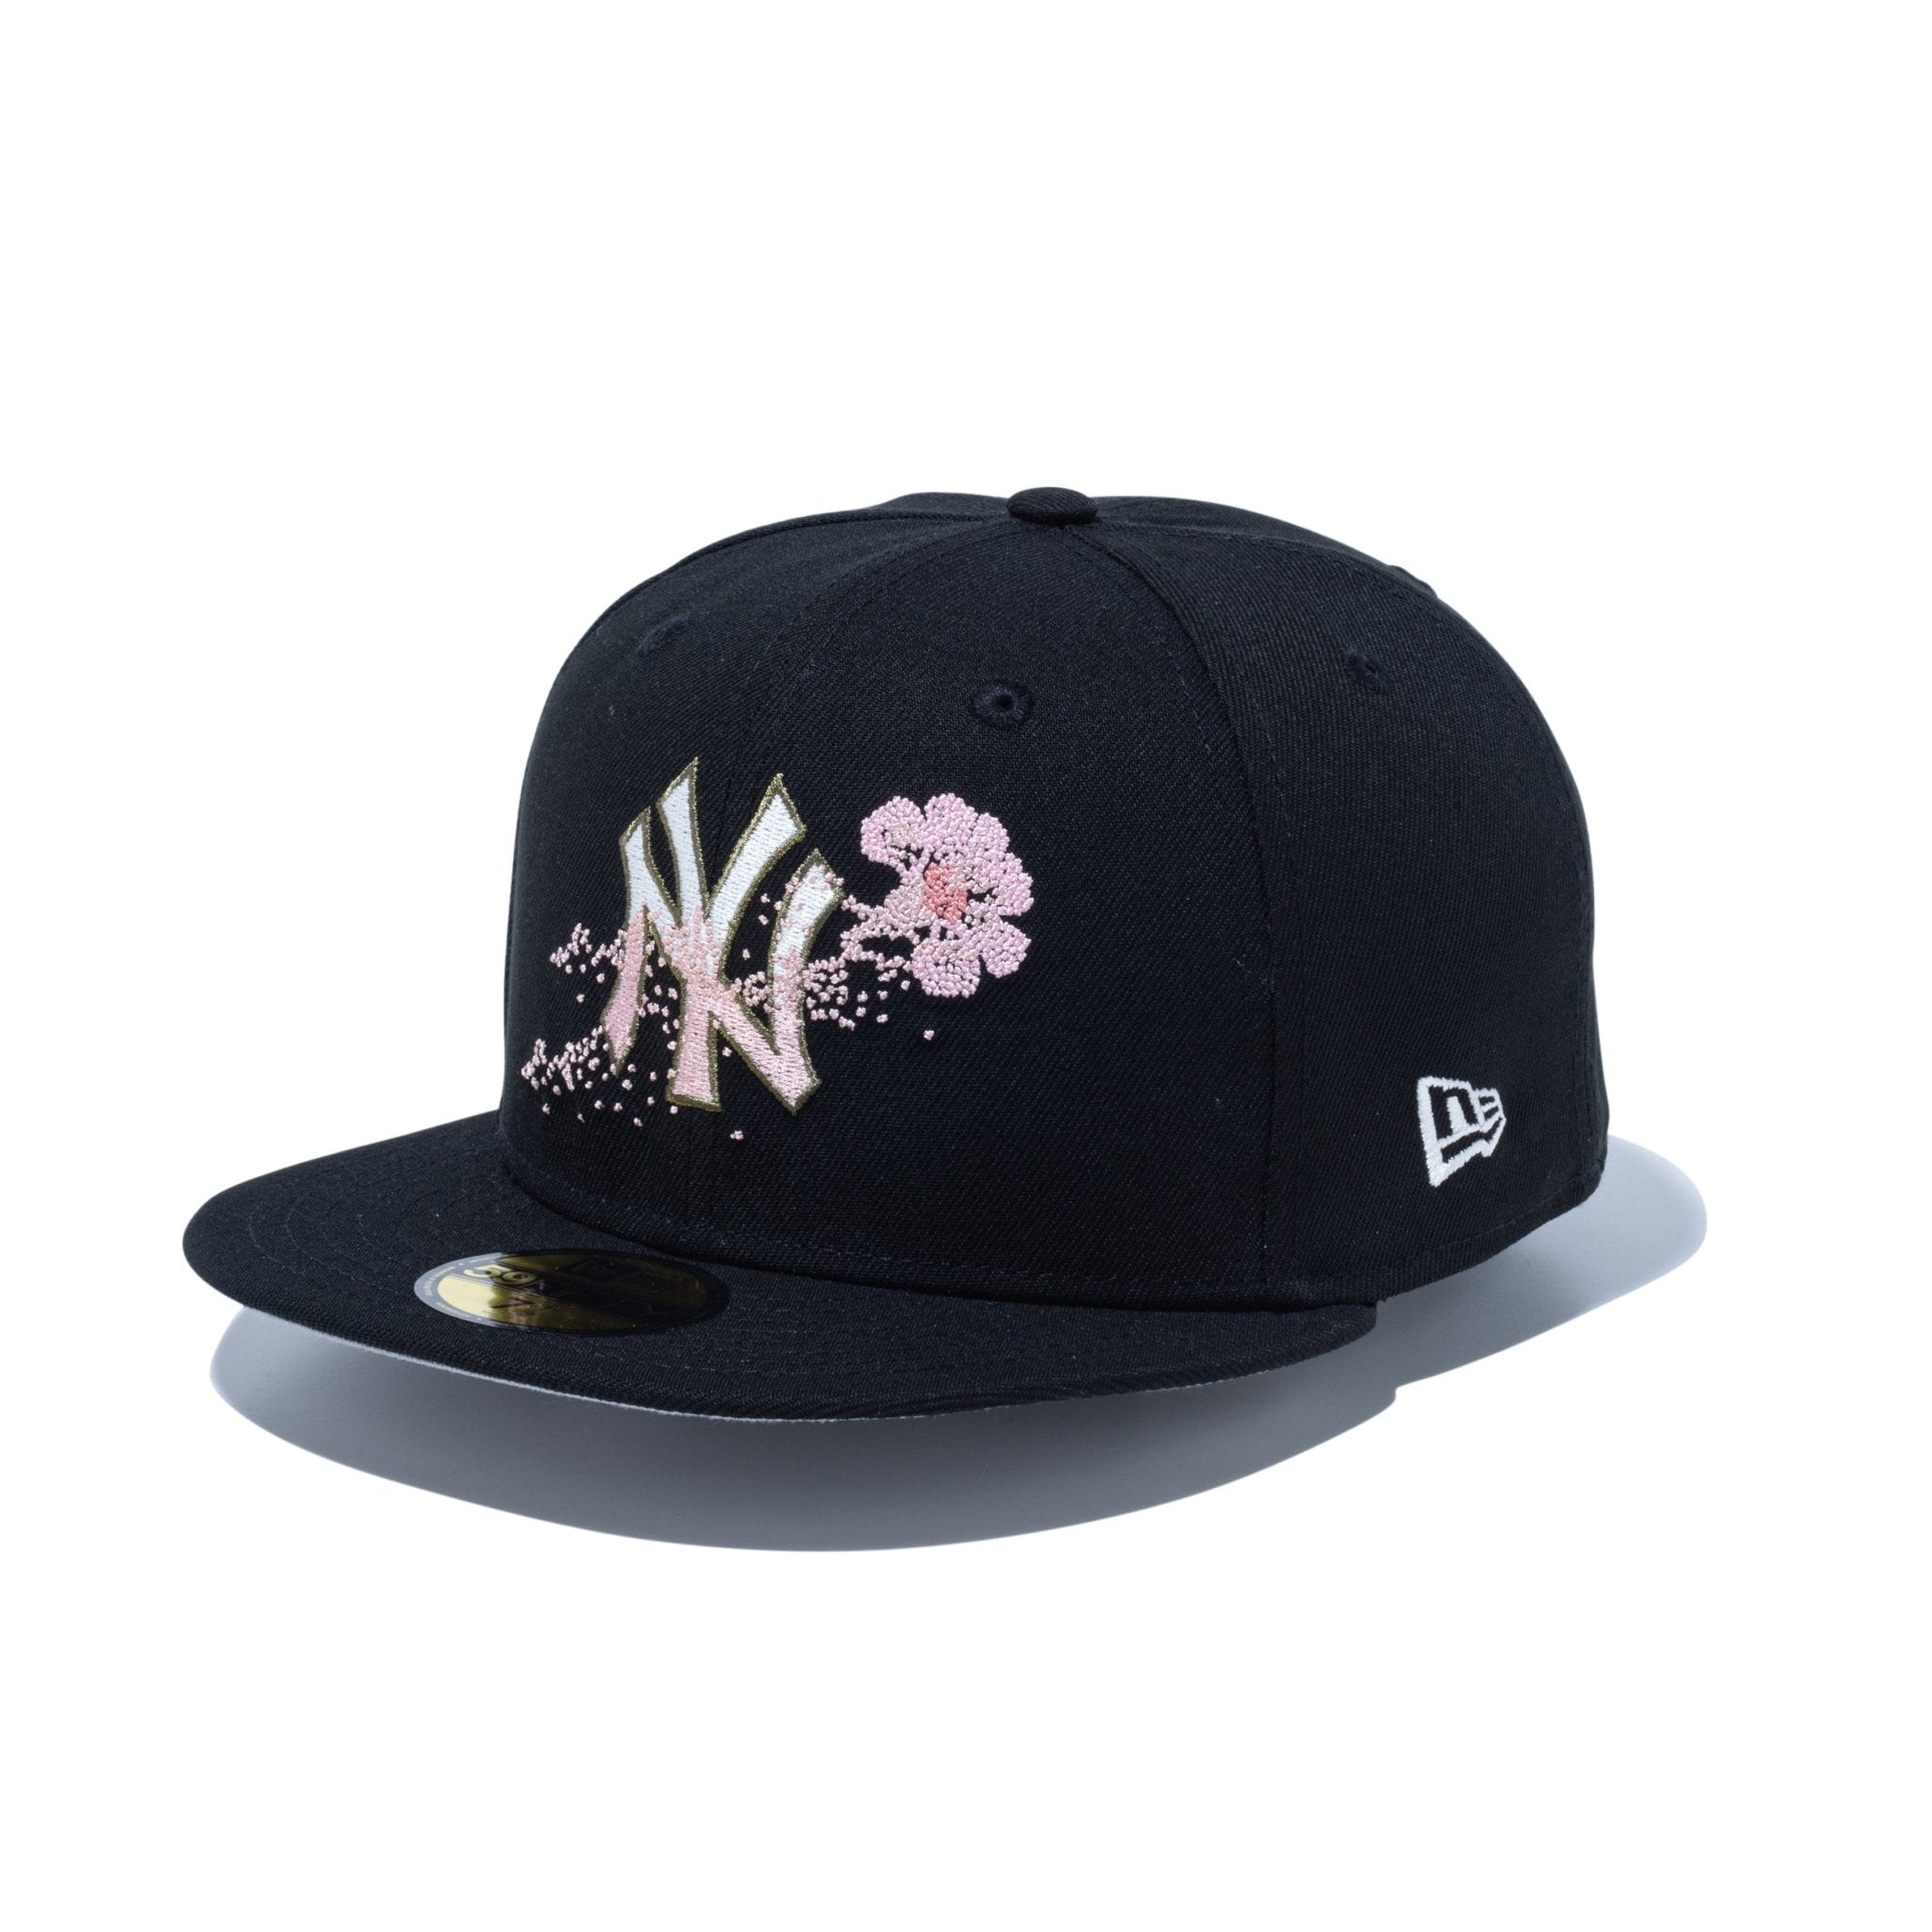 59FIFTY Dotted Floral ニューヨーク・ヤンキース ブラック 